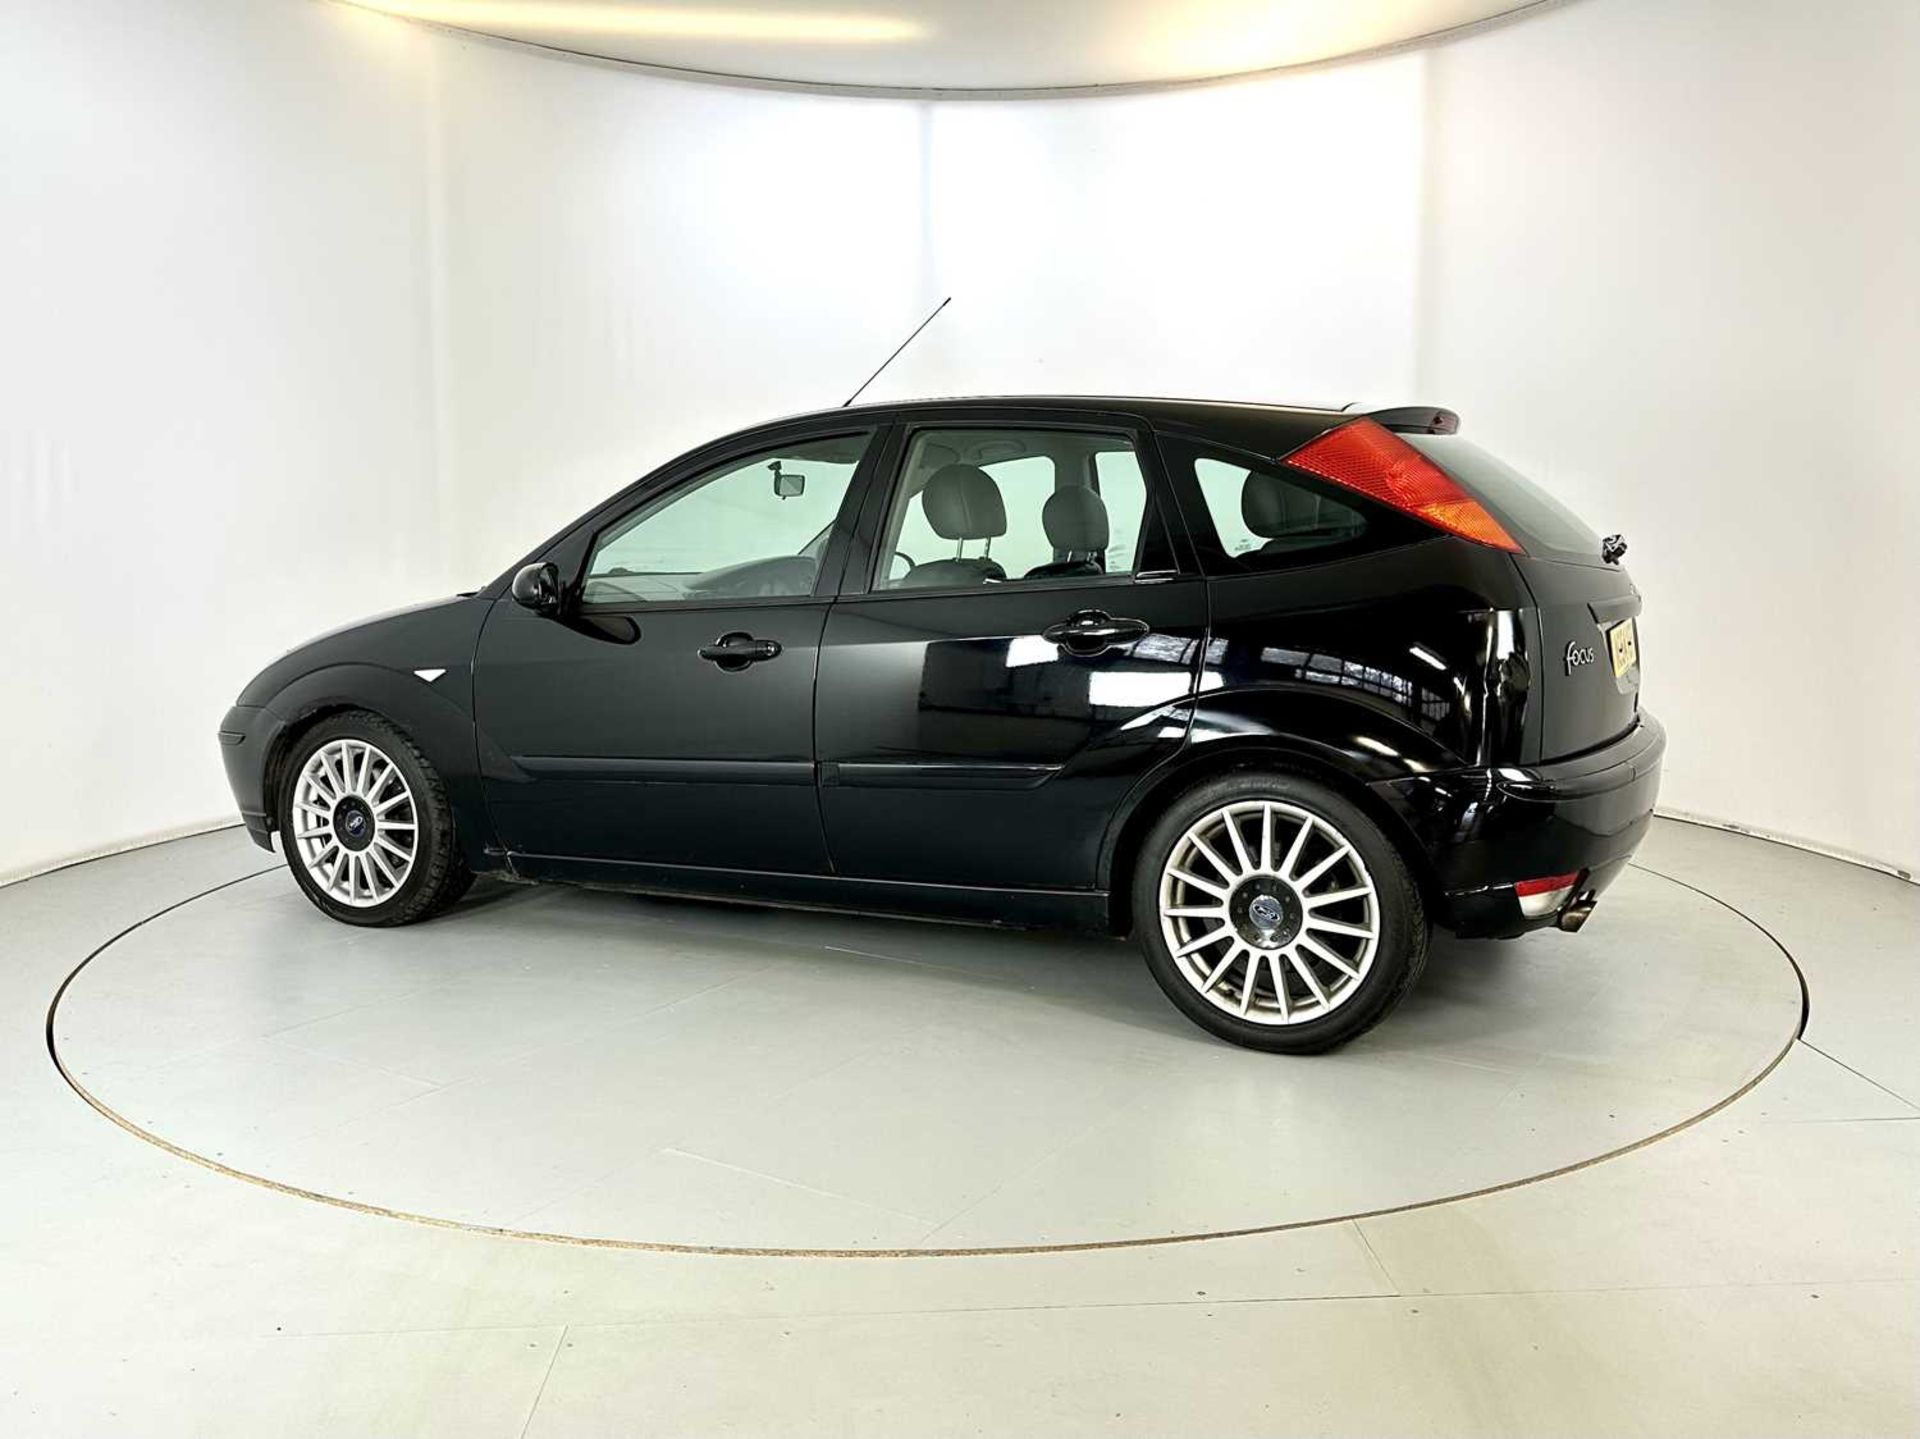 2004 Ford Focus ST170 - NO RESERVE - Image 6 of 34